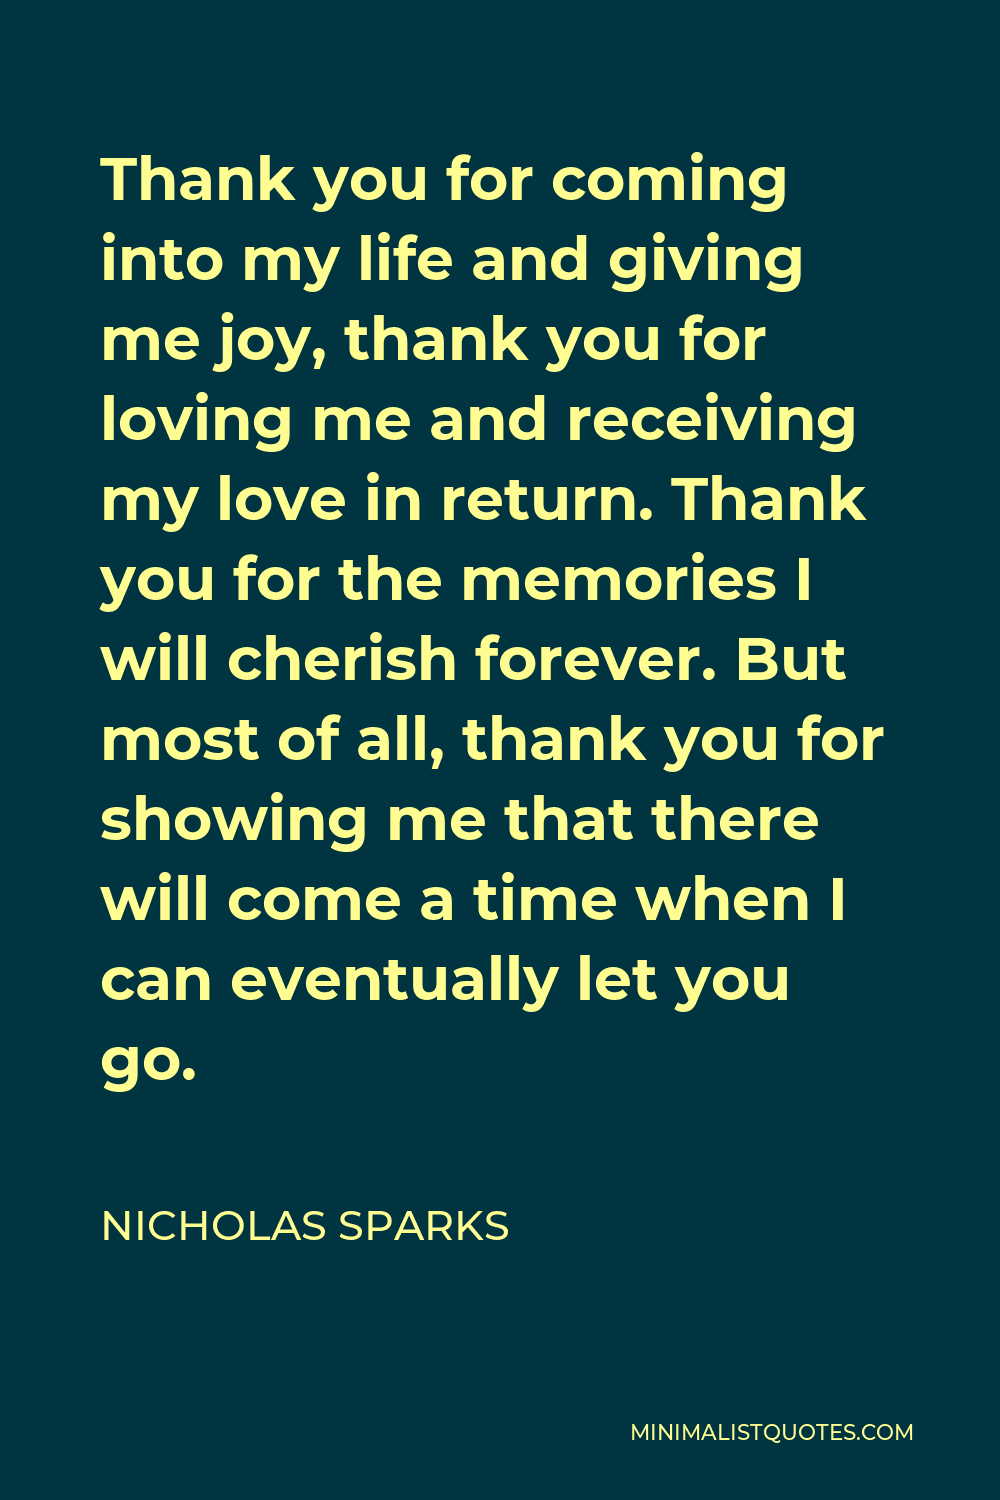 Nicholas Sparks Quote: Thank you for coming into my life and